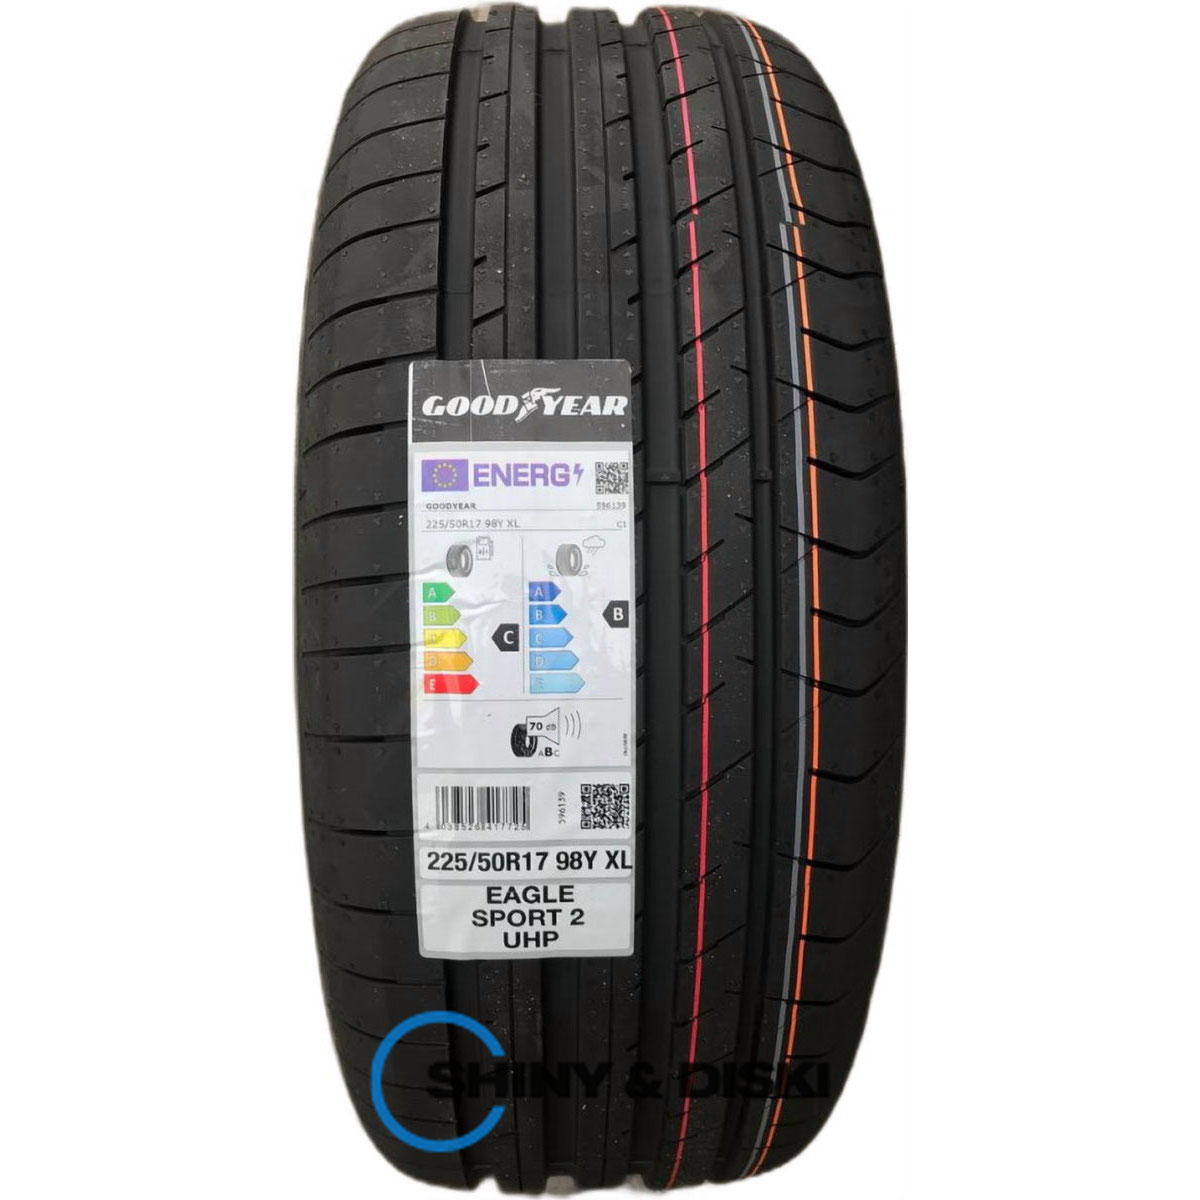 покришки goodyear eagle sport 2 uhp 235/45 r18 98y xl fp